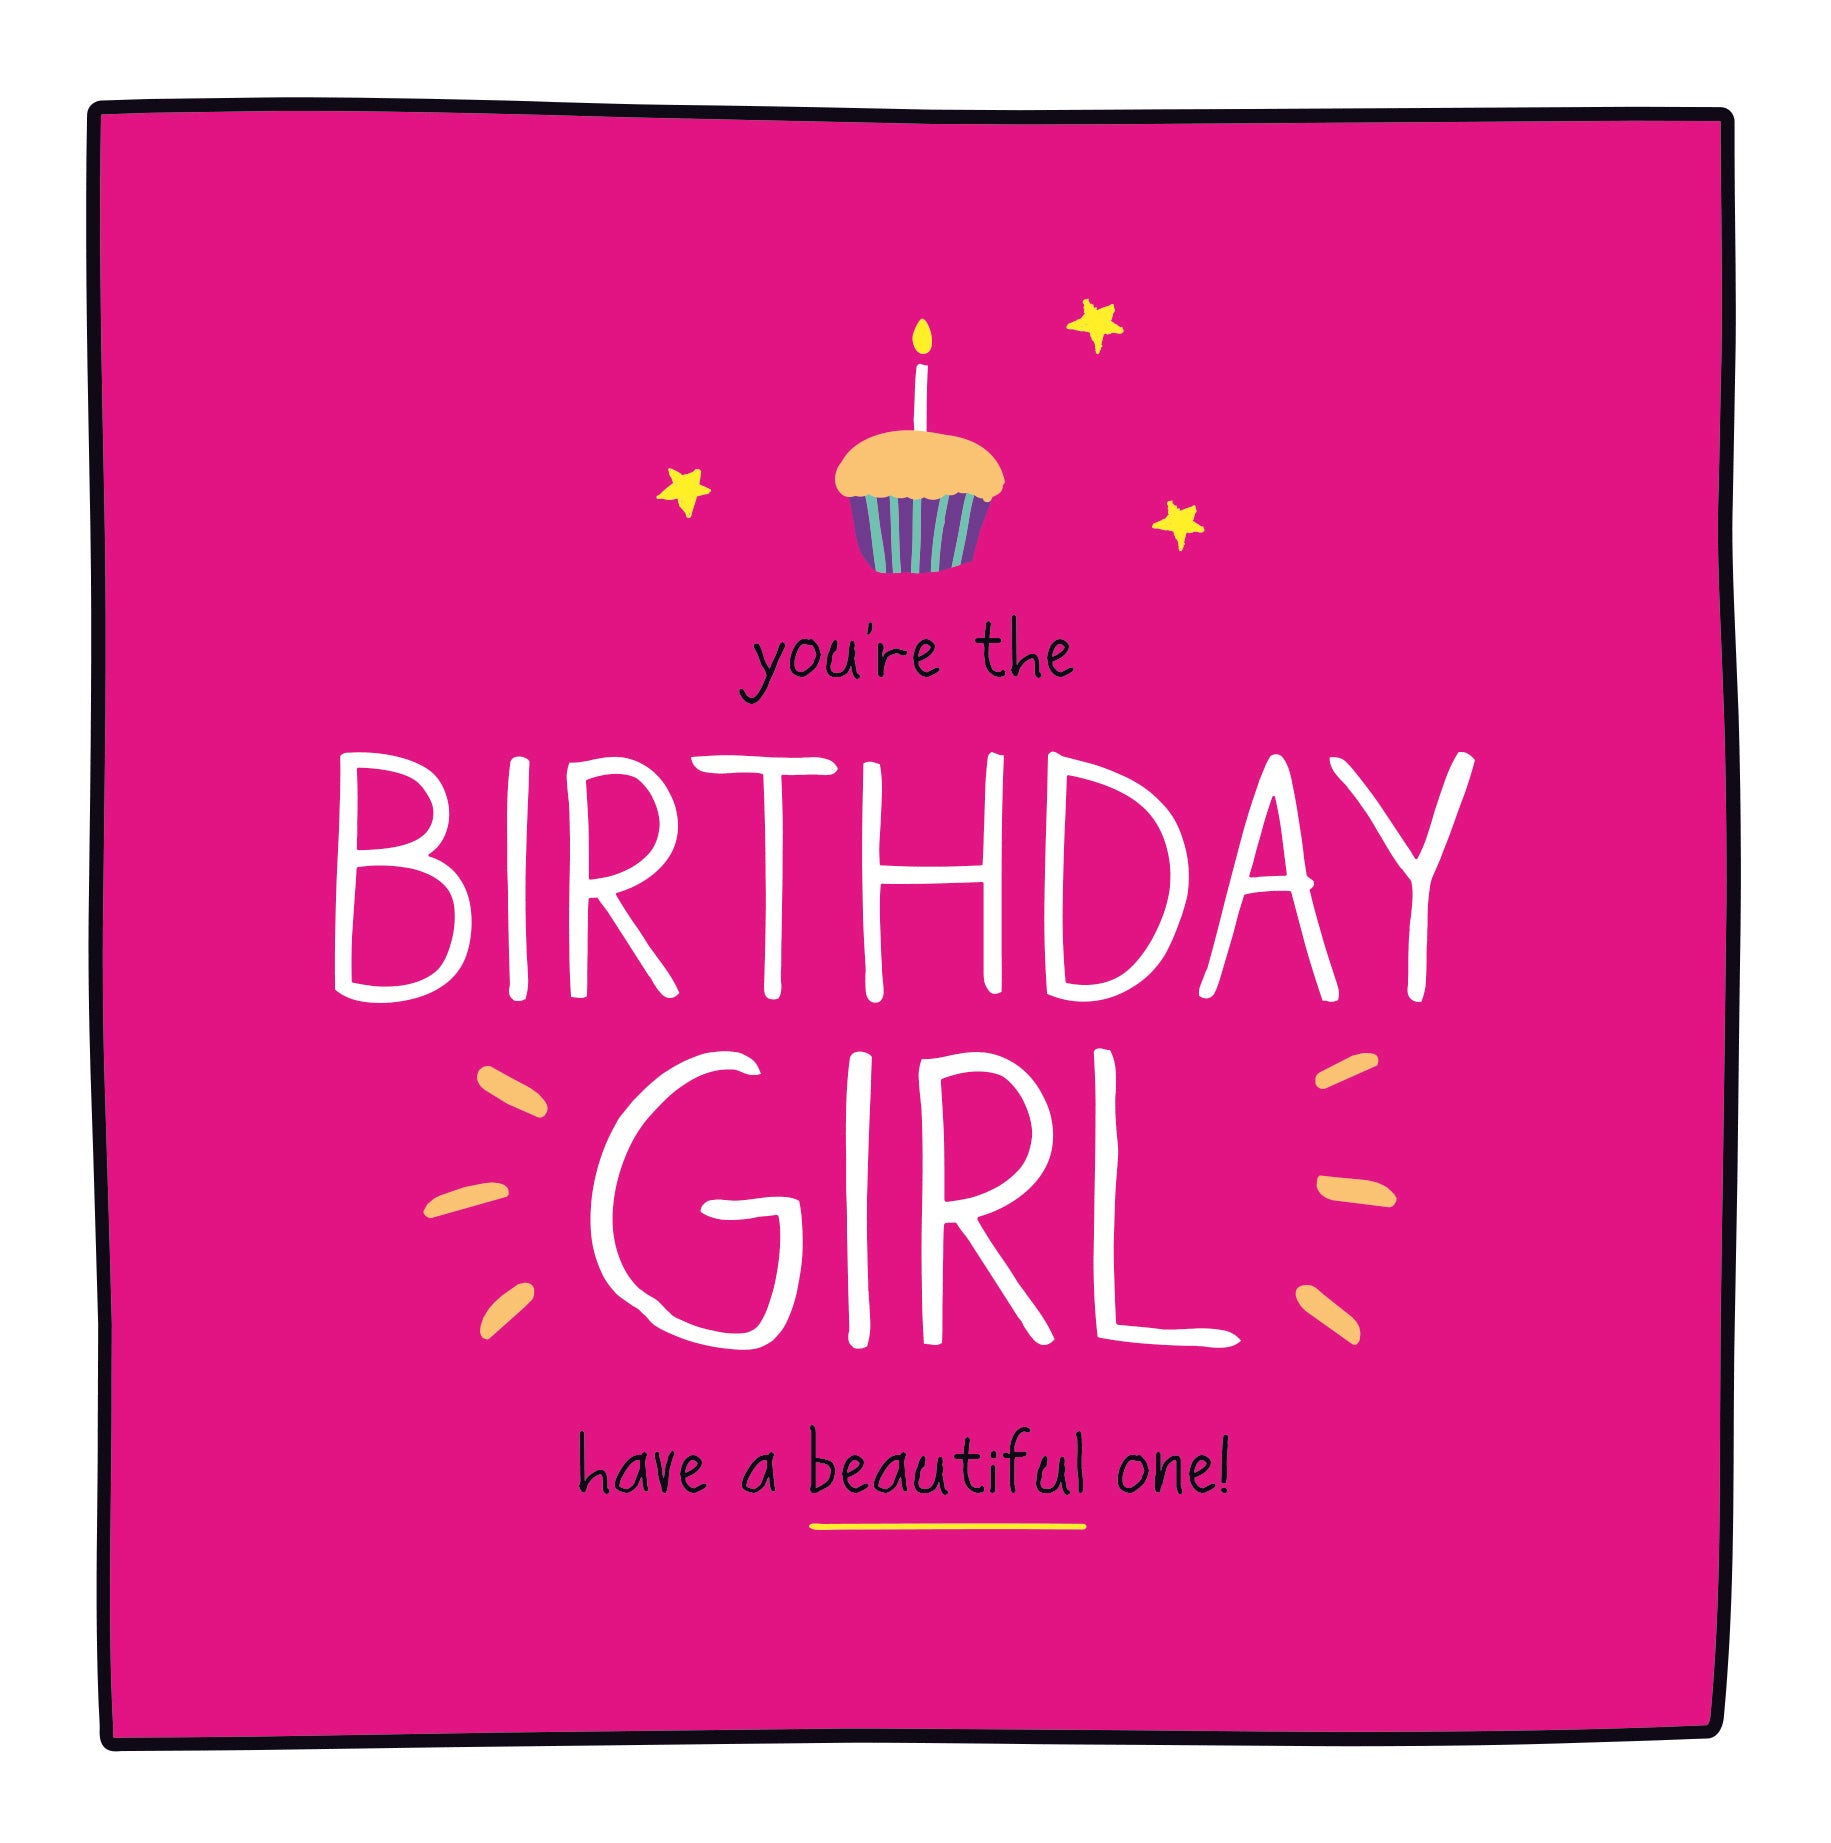 Birthday Girl Beautiful One Card from Penny Black